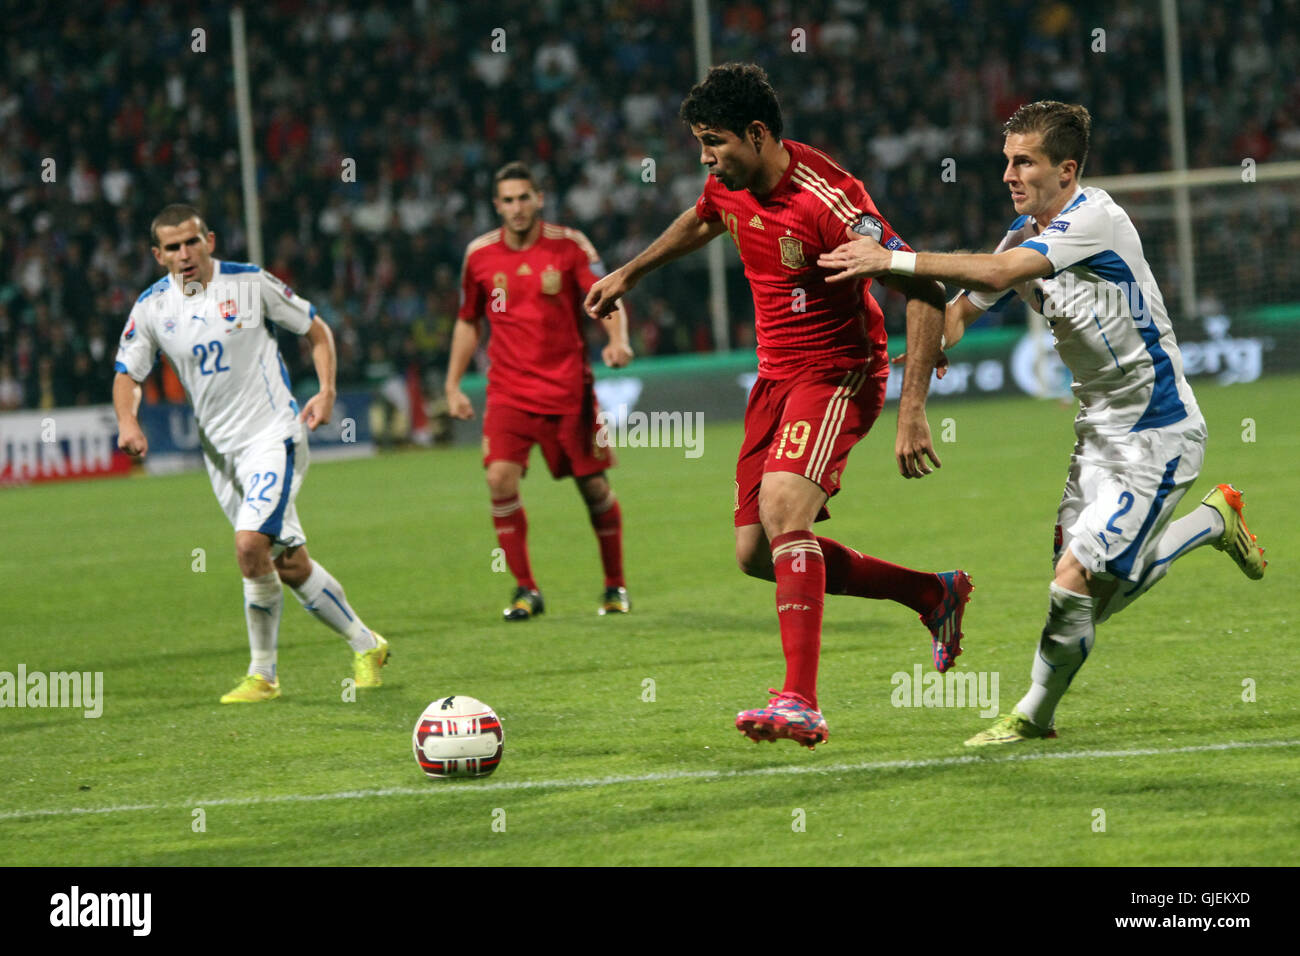 Diego Costa (19) and Peter Pekarik (2) in action during EURO 2016 qualifier Slovakia vs Spain 2-1. Stock Photo